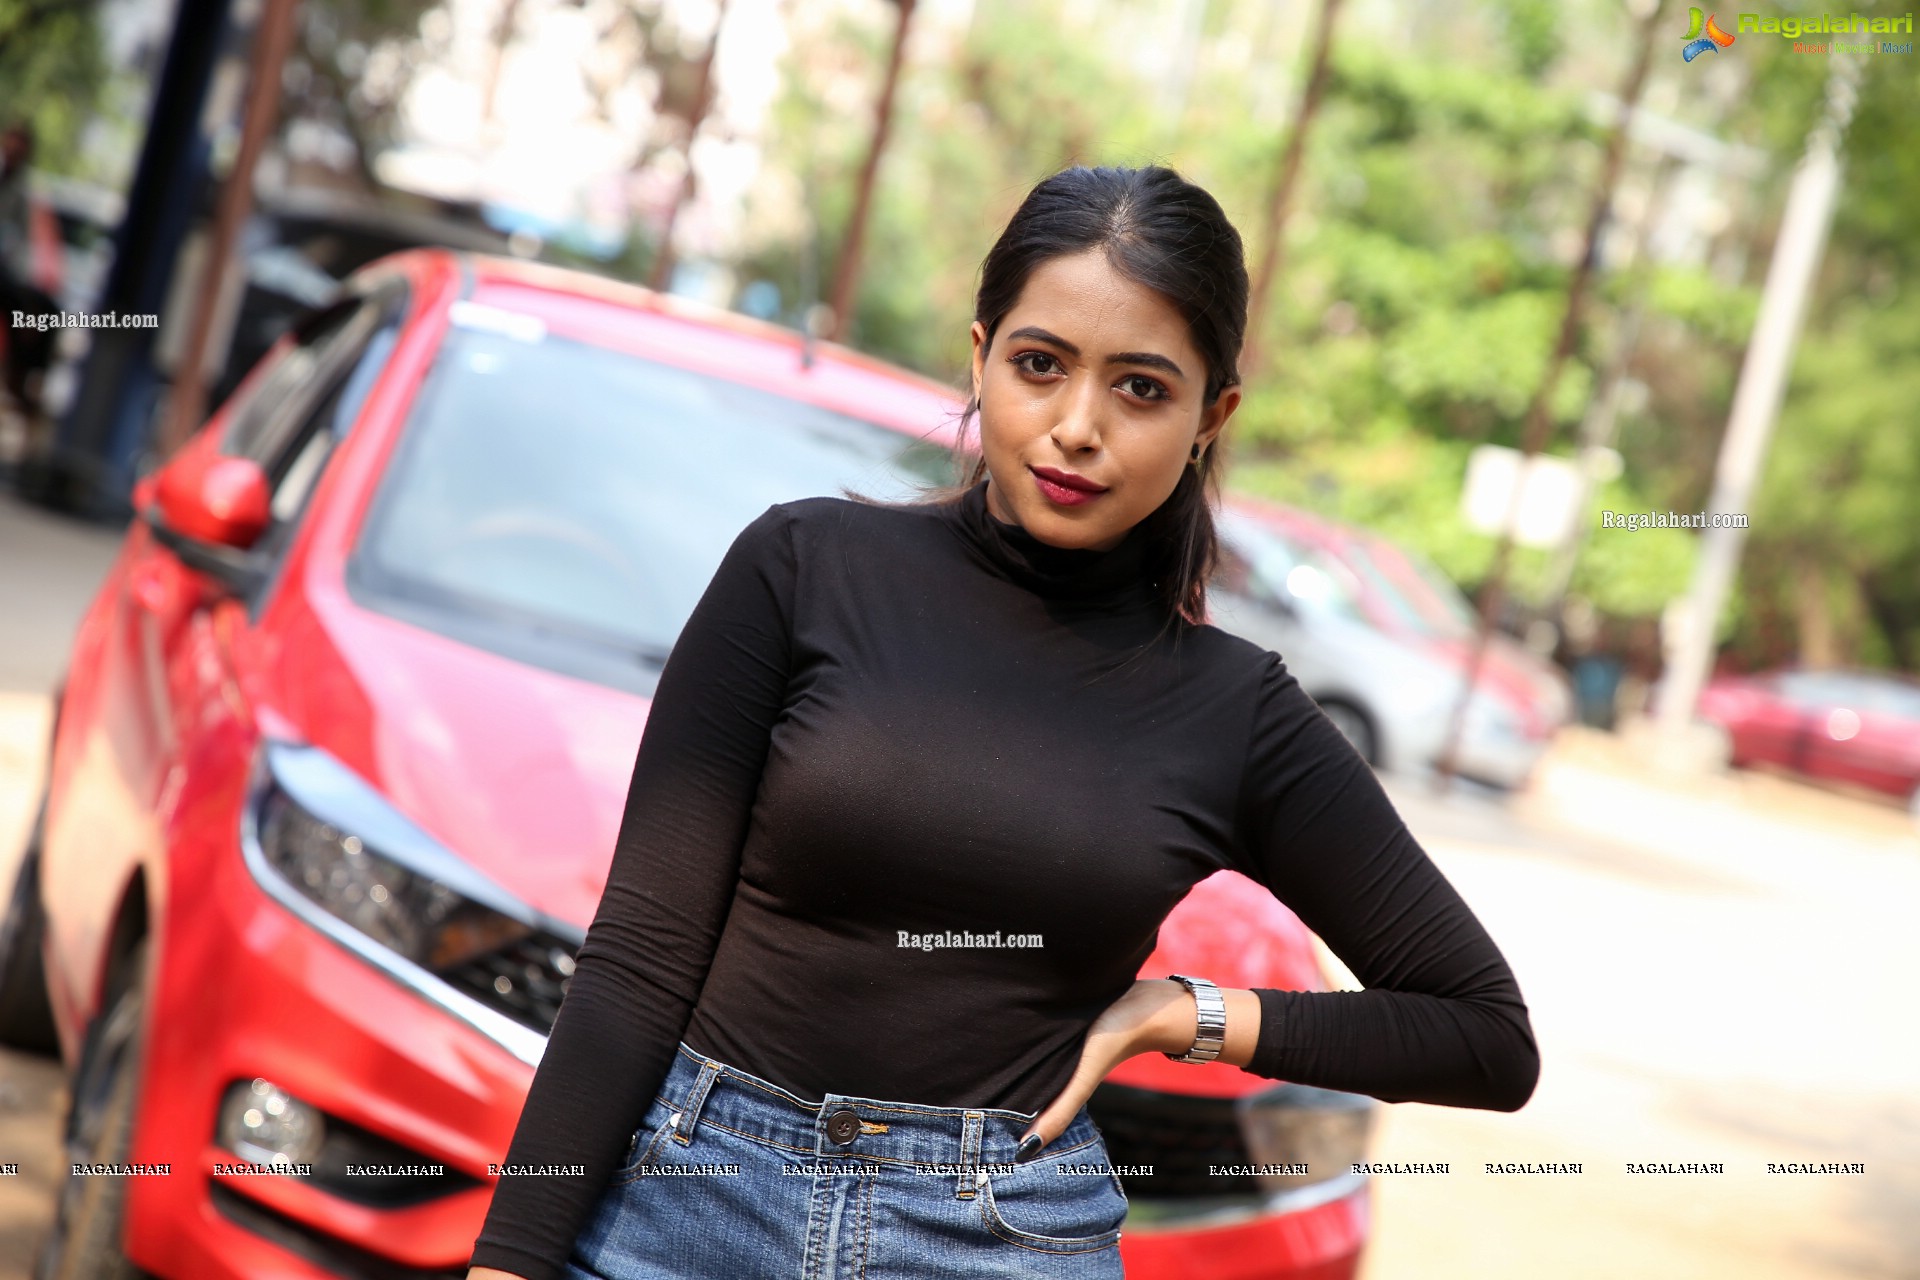 Rittika Chakraborthy at Right Cars Free Covid Disinfectant Service For Cars Launch, HD stills